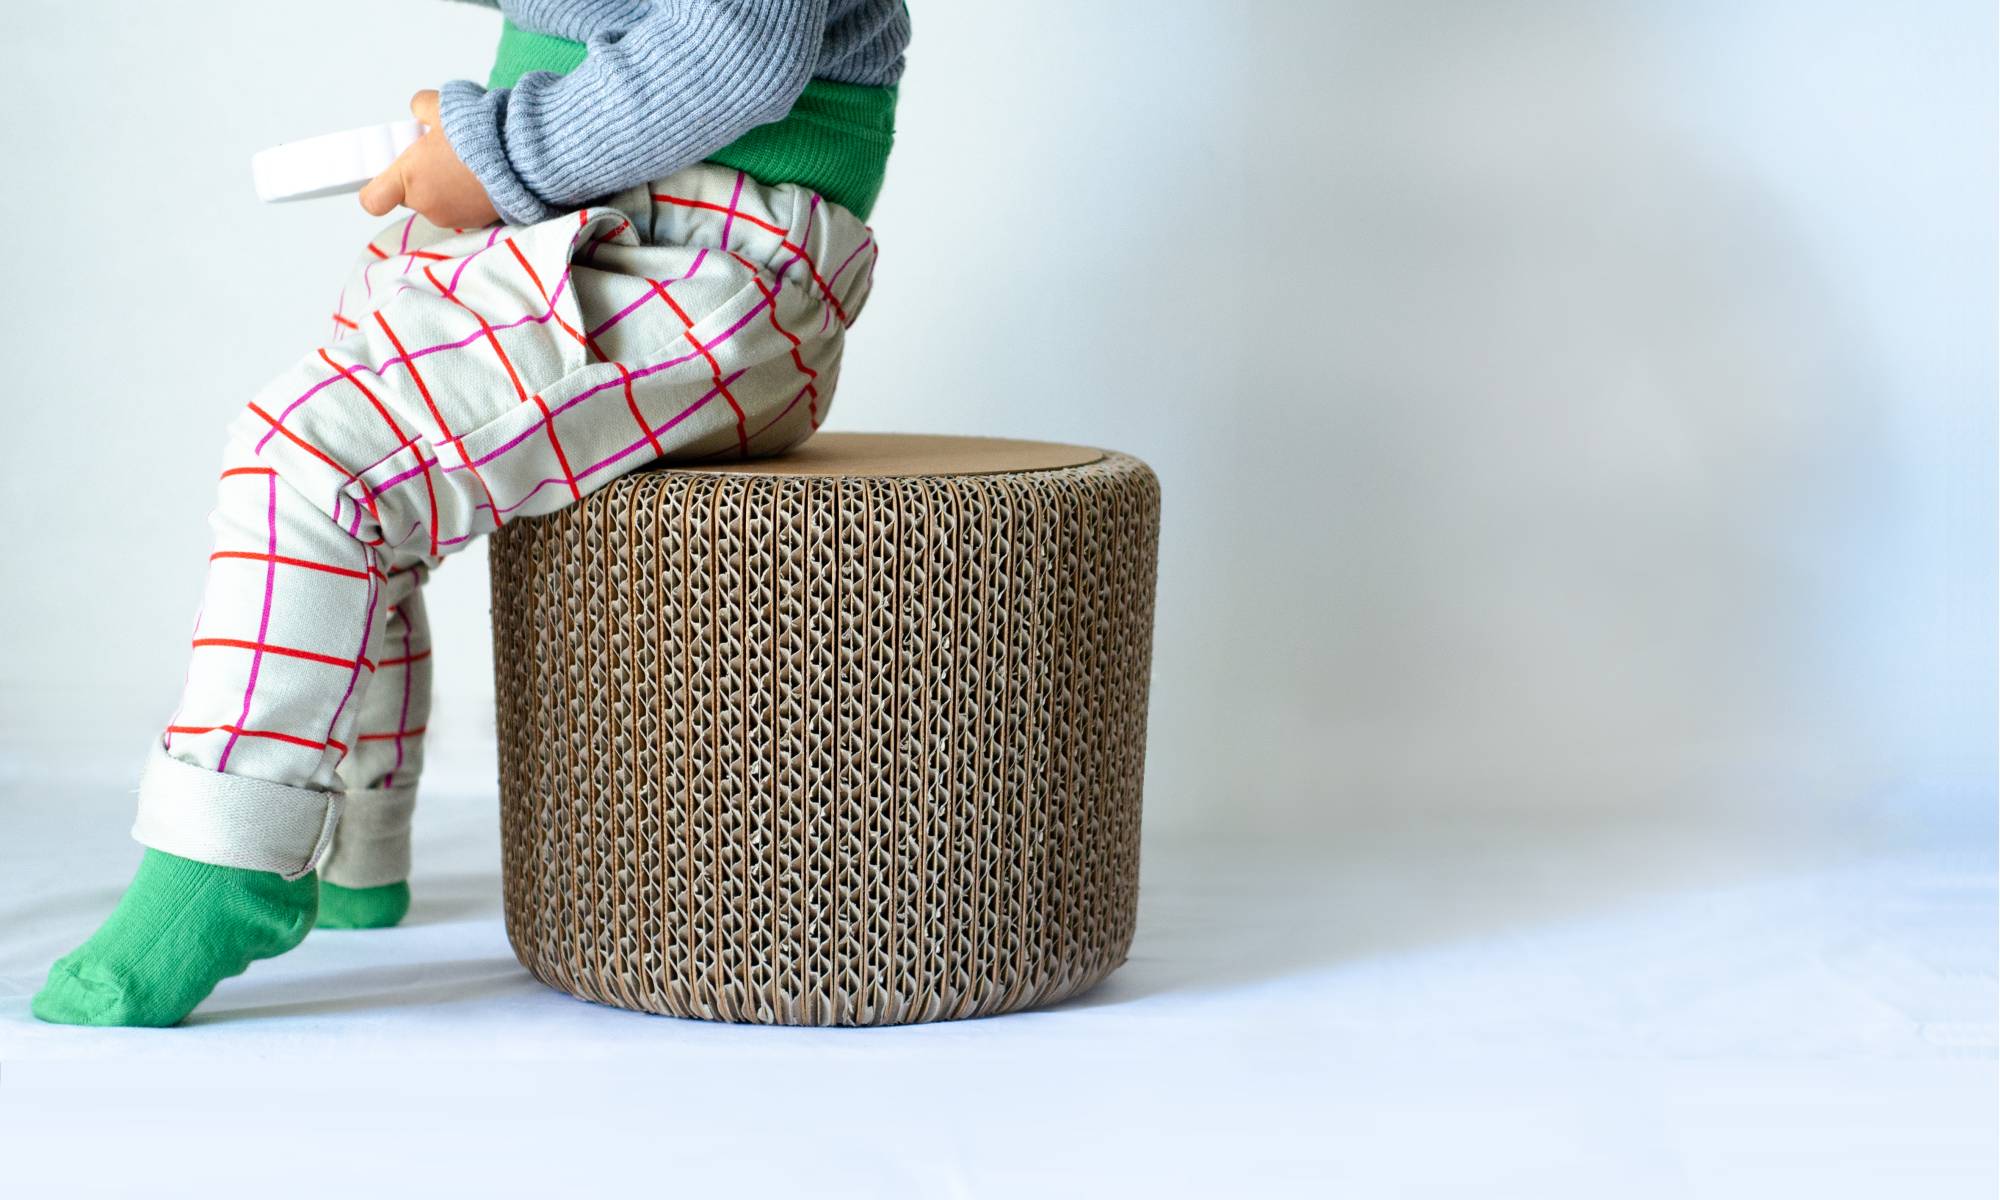 Fun for all: Aichi Design Vision paired companies with up-and-coming designers to create brand new homeware products such as the Corncob, a DIY stool kit. | 